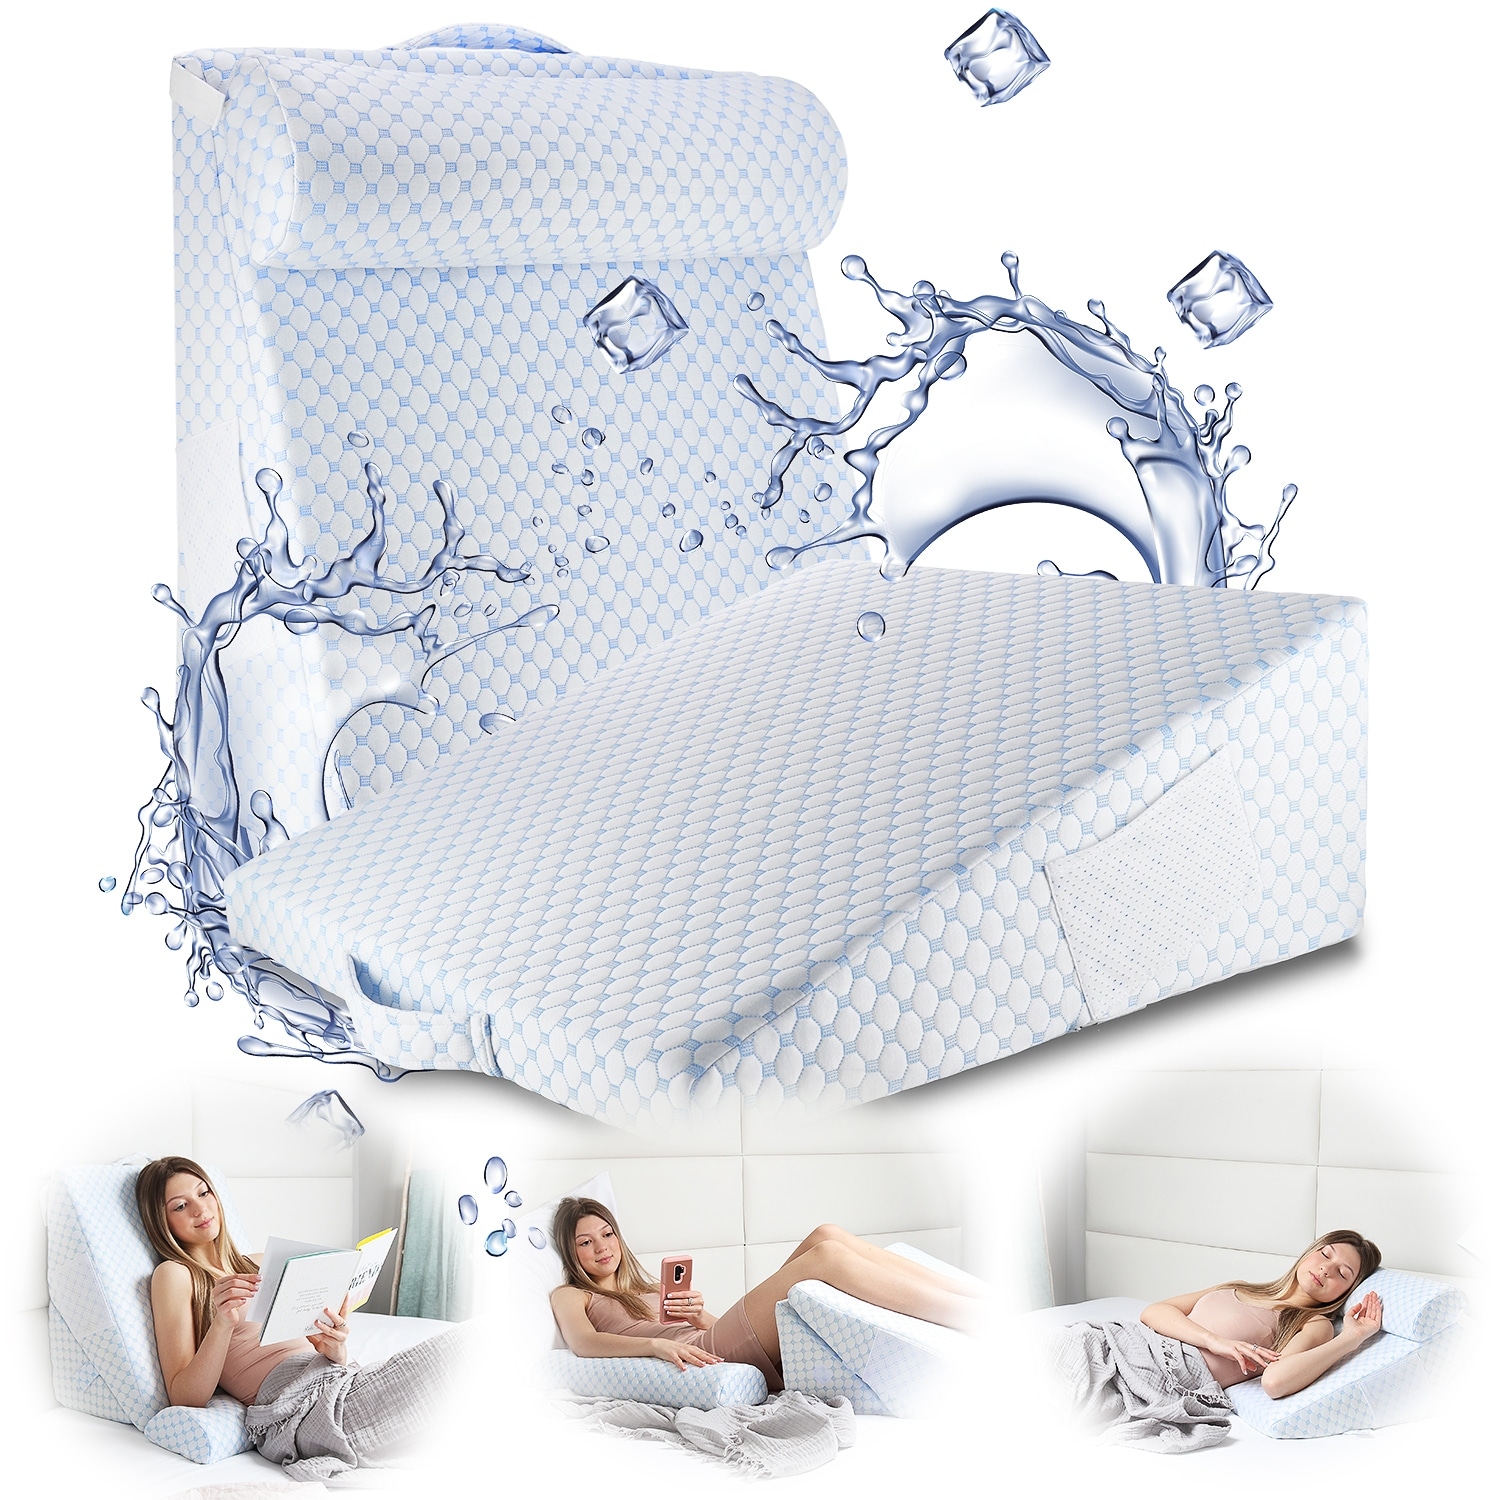 https://ak1.ostkcdn.com/images/products/is/images/direct/a44e8ed26a076b85f59db570ea6e44d309eddd9e/Nestl-Cooling-Bed-Wedge-Pillow-with-Bolster-Pillow---25%22-x-25%22-x-10%22---8-in-1-Triangle-Pillow-Wedge-for-Sleeping-Acid-Reflux.jpg